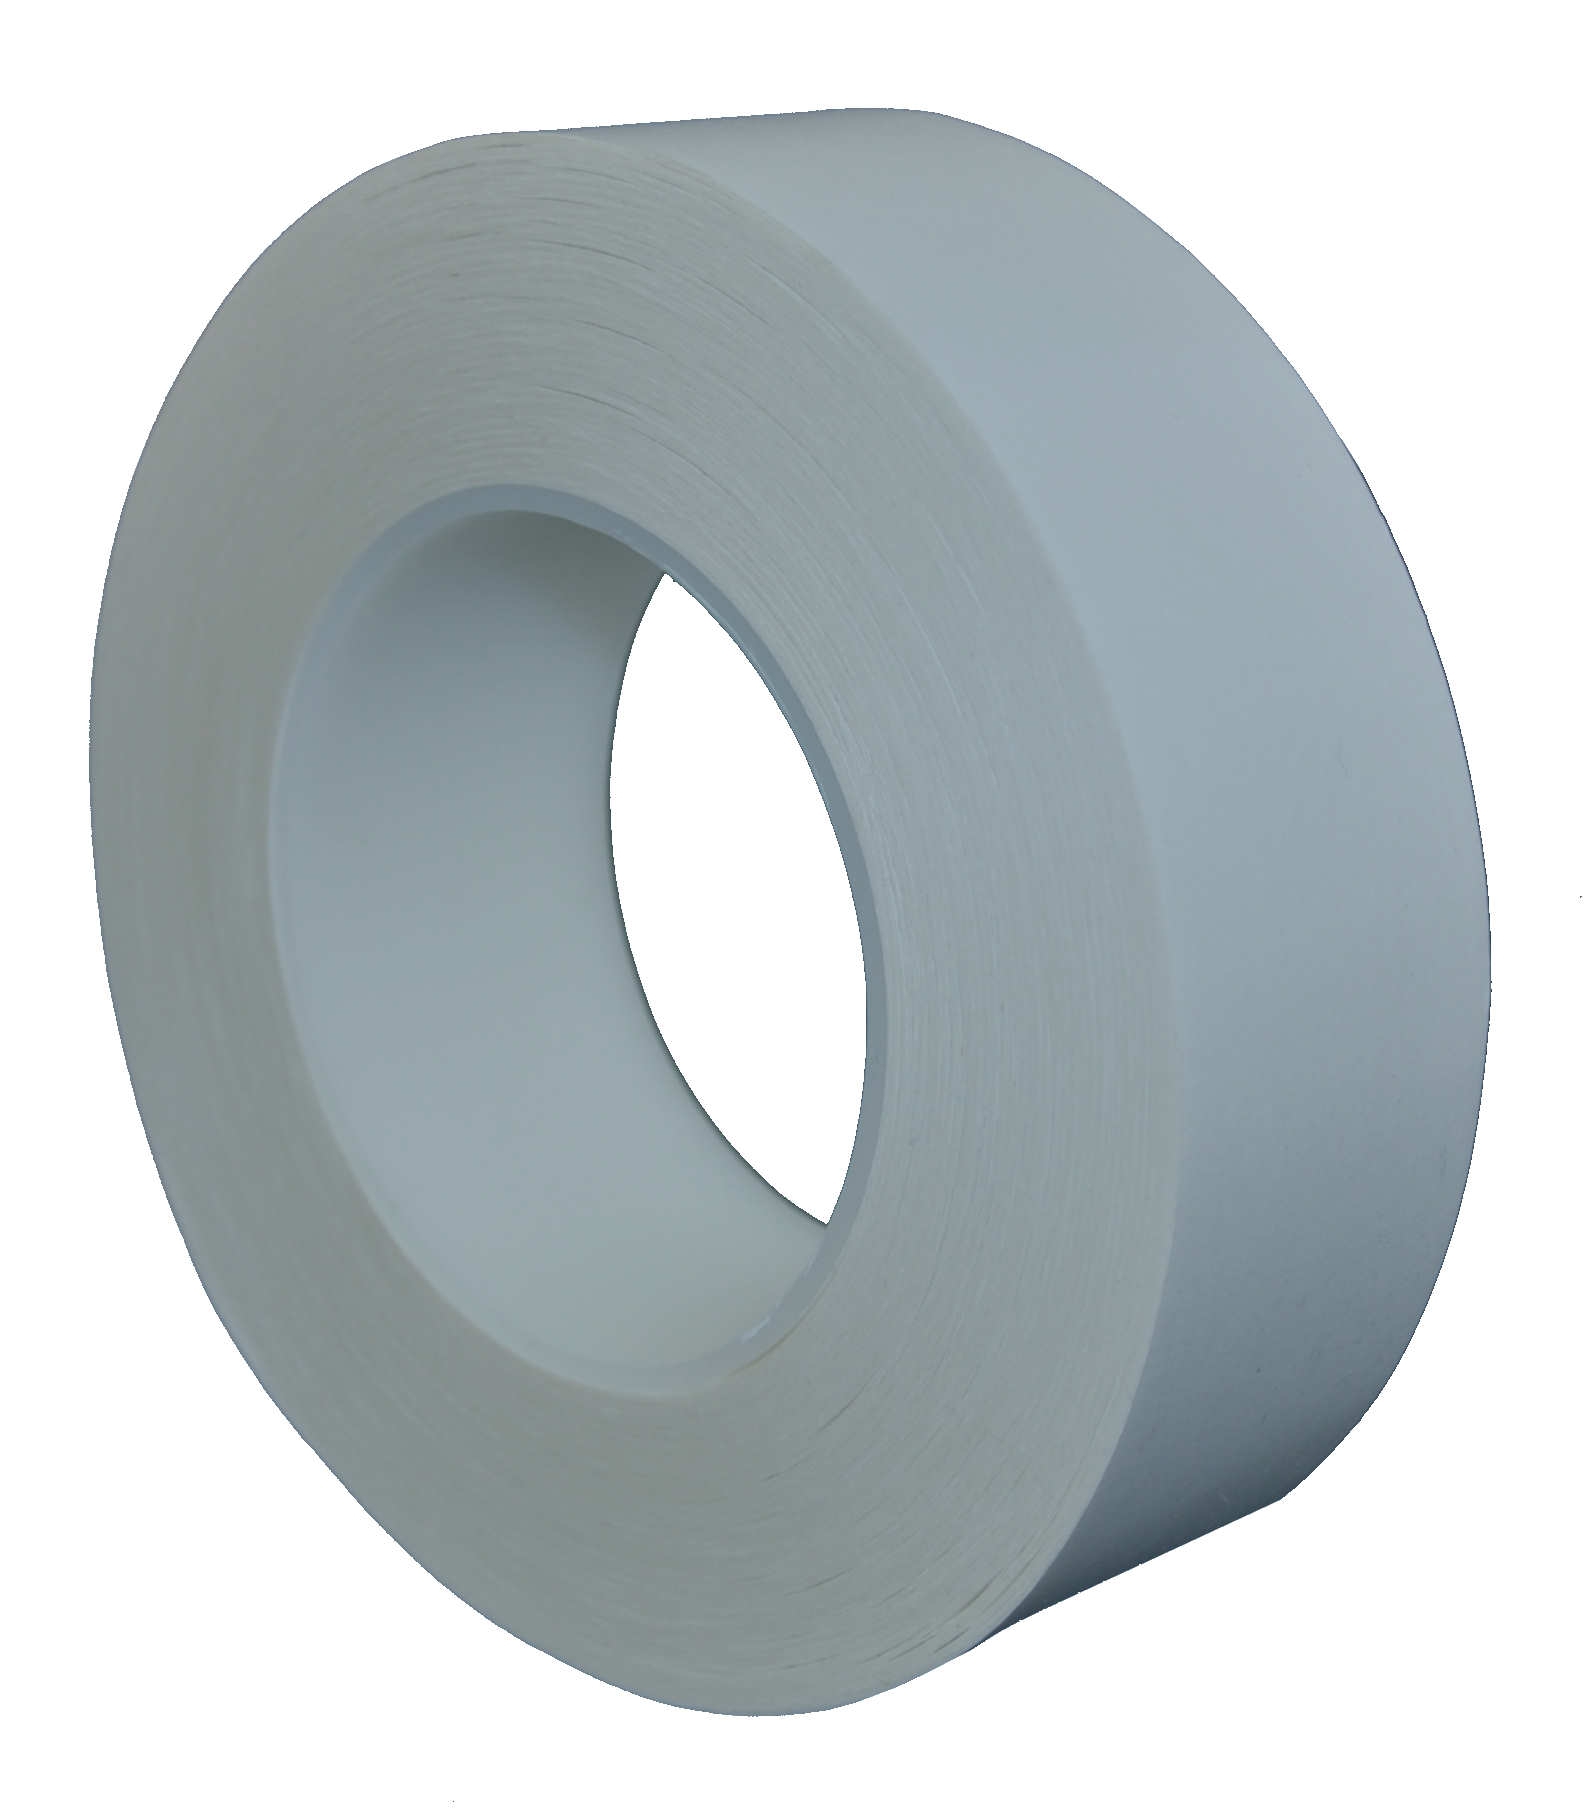 S-K-S dubbelzijdig plakband met polyester drager 480, transparant, 15 mm x 50 m, 0,09 mm